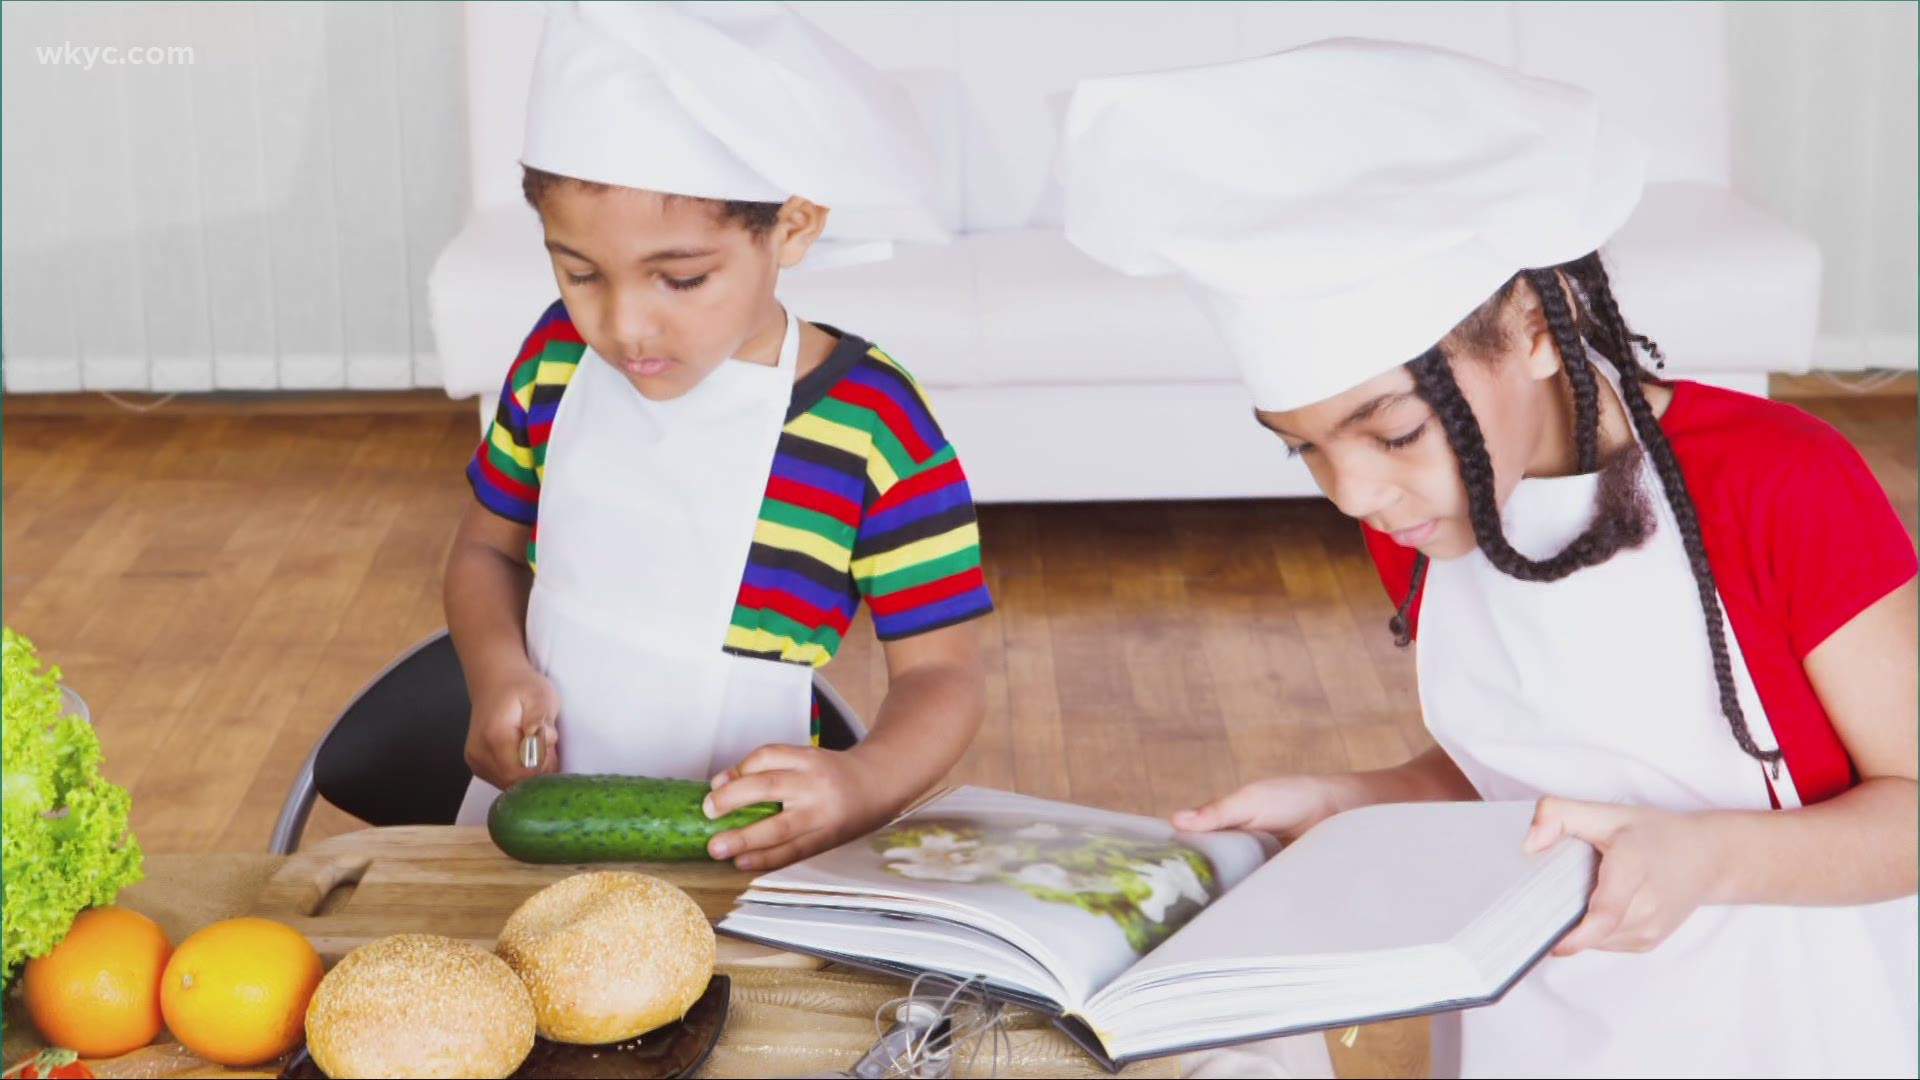 December 21, 2020: One thing that has always helped bring people together is food and cooking! We got expert advice on how to get your kids excited about cooking.